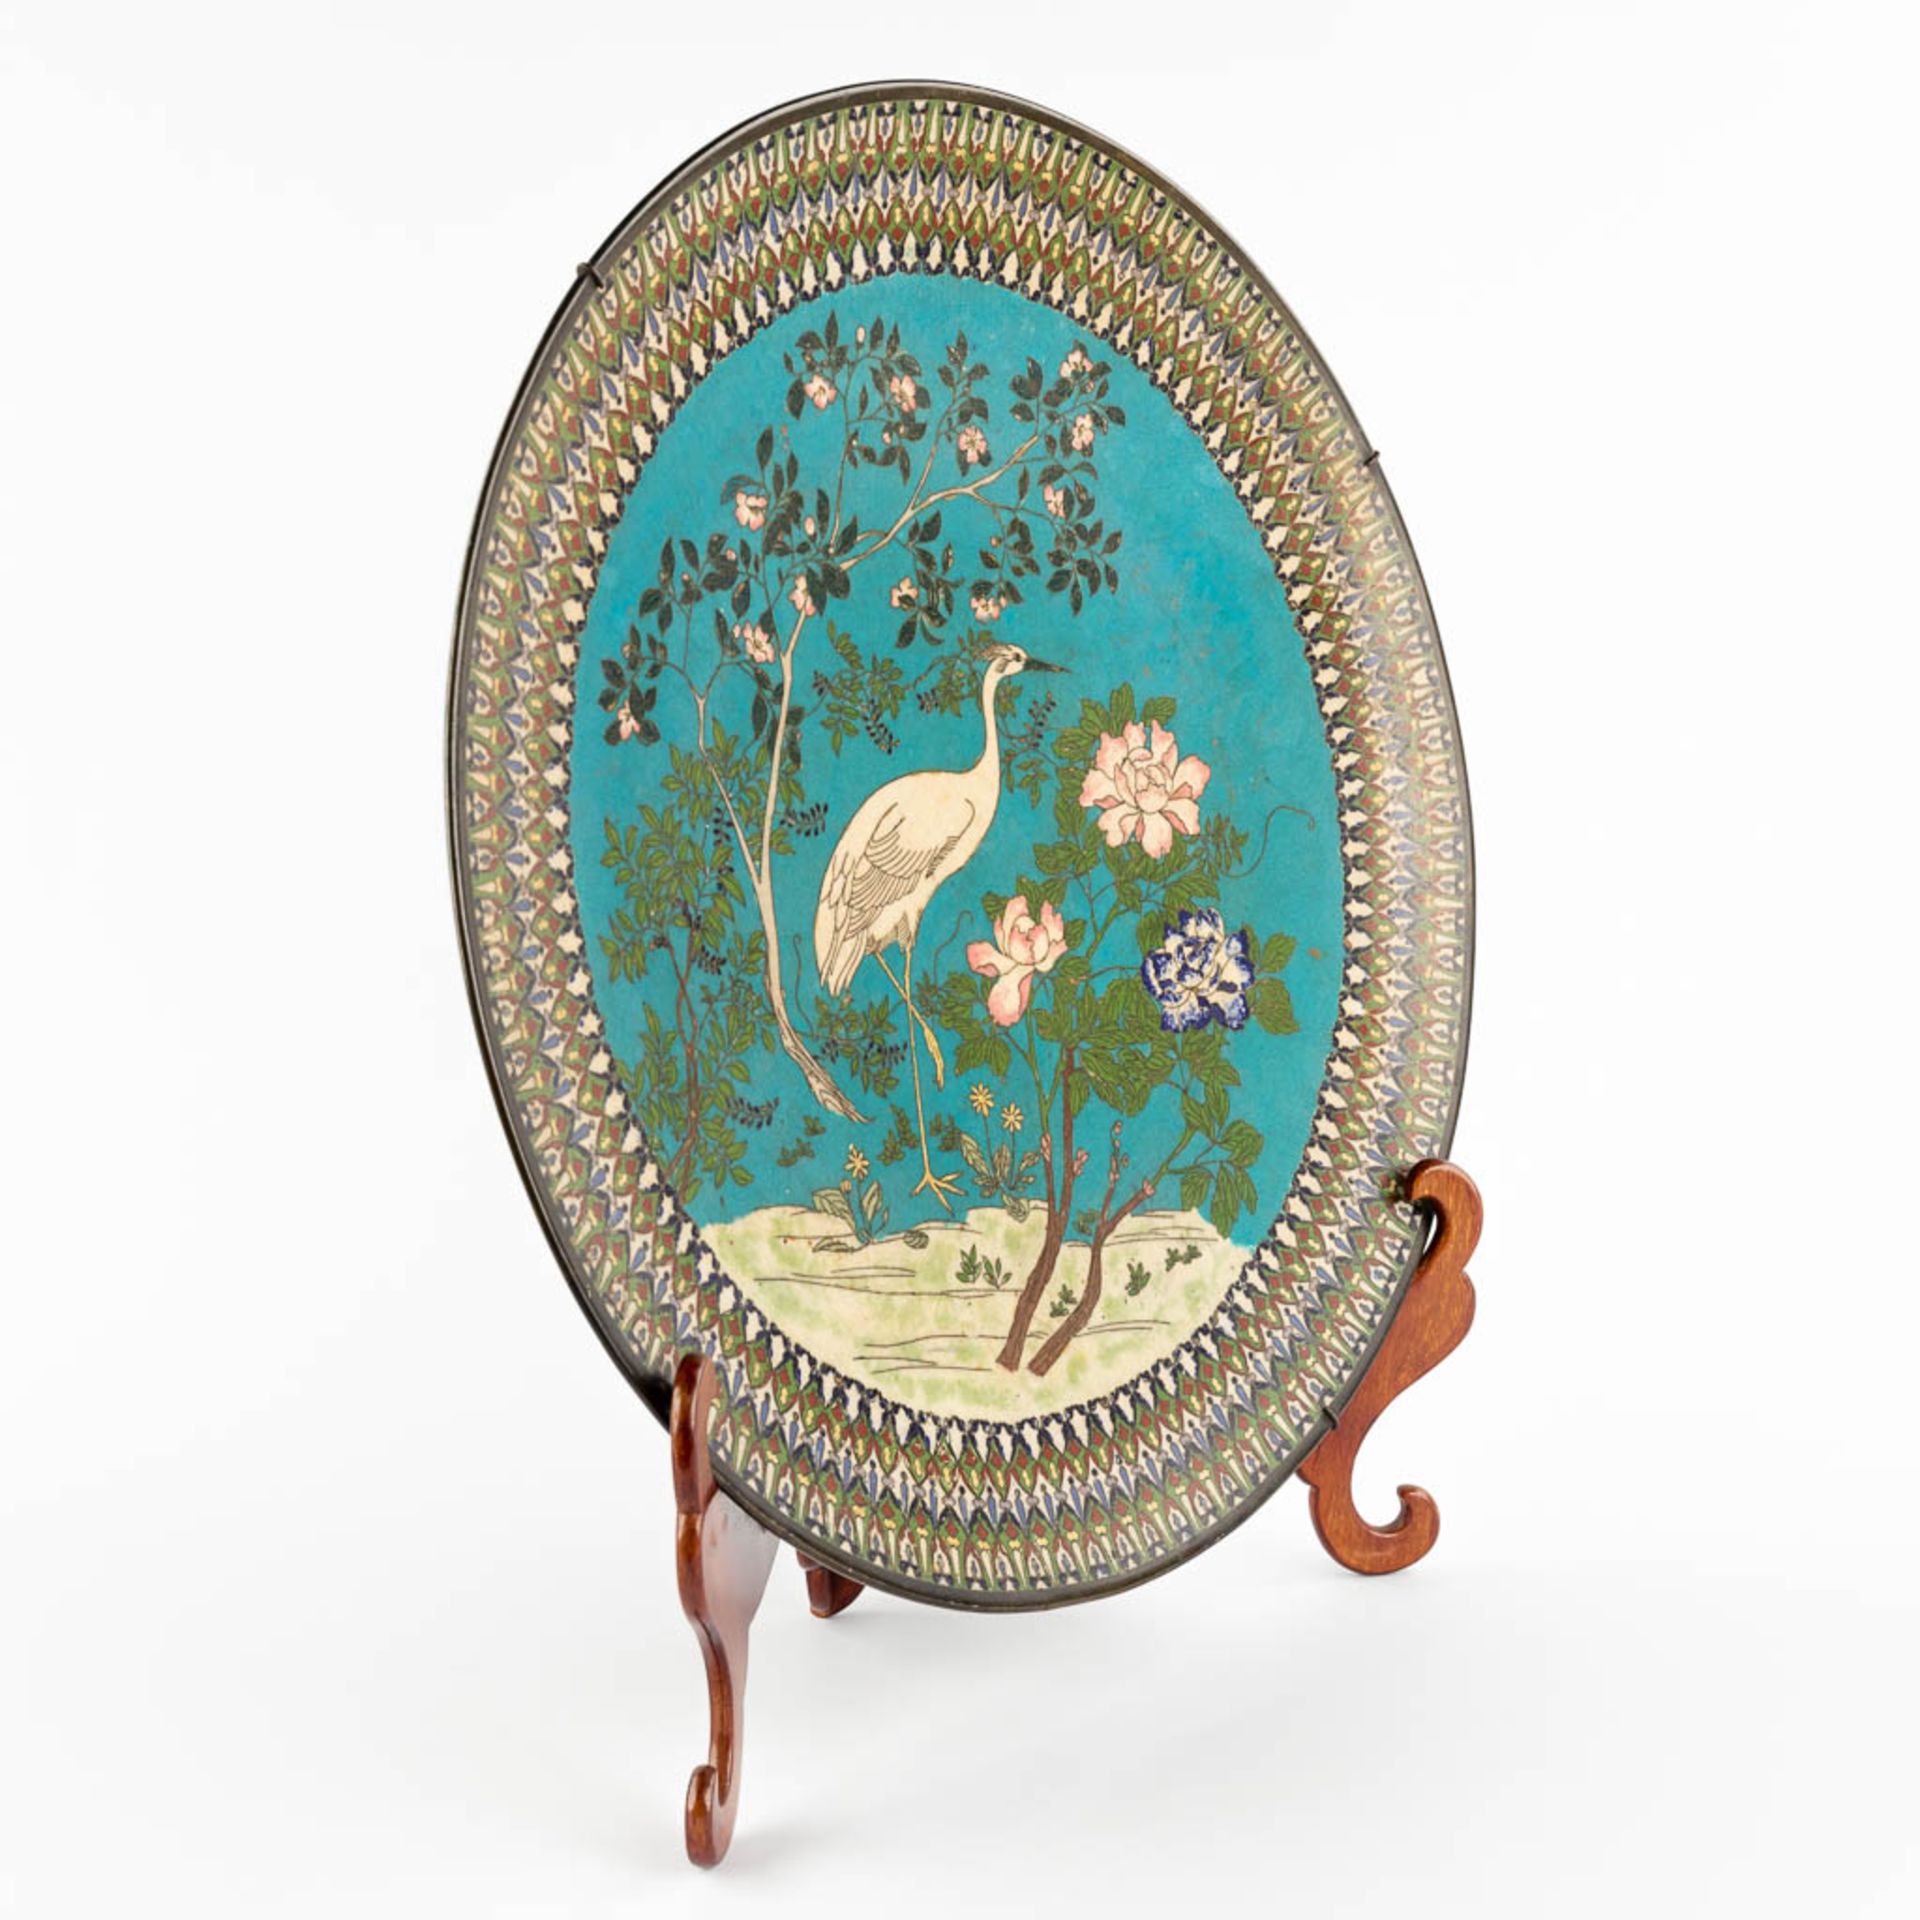 A large plate with a heron, cloisonné enamel, probably 19th C. (D:45 cm) - Image 3 of 9